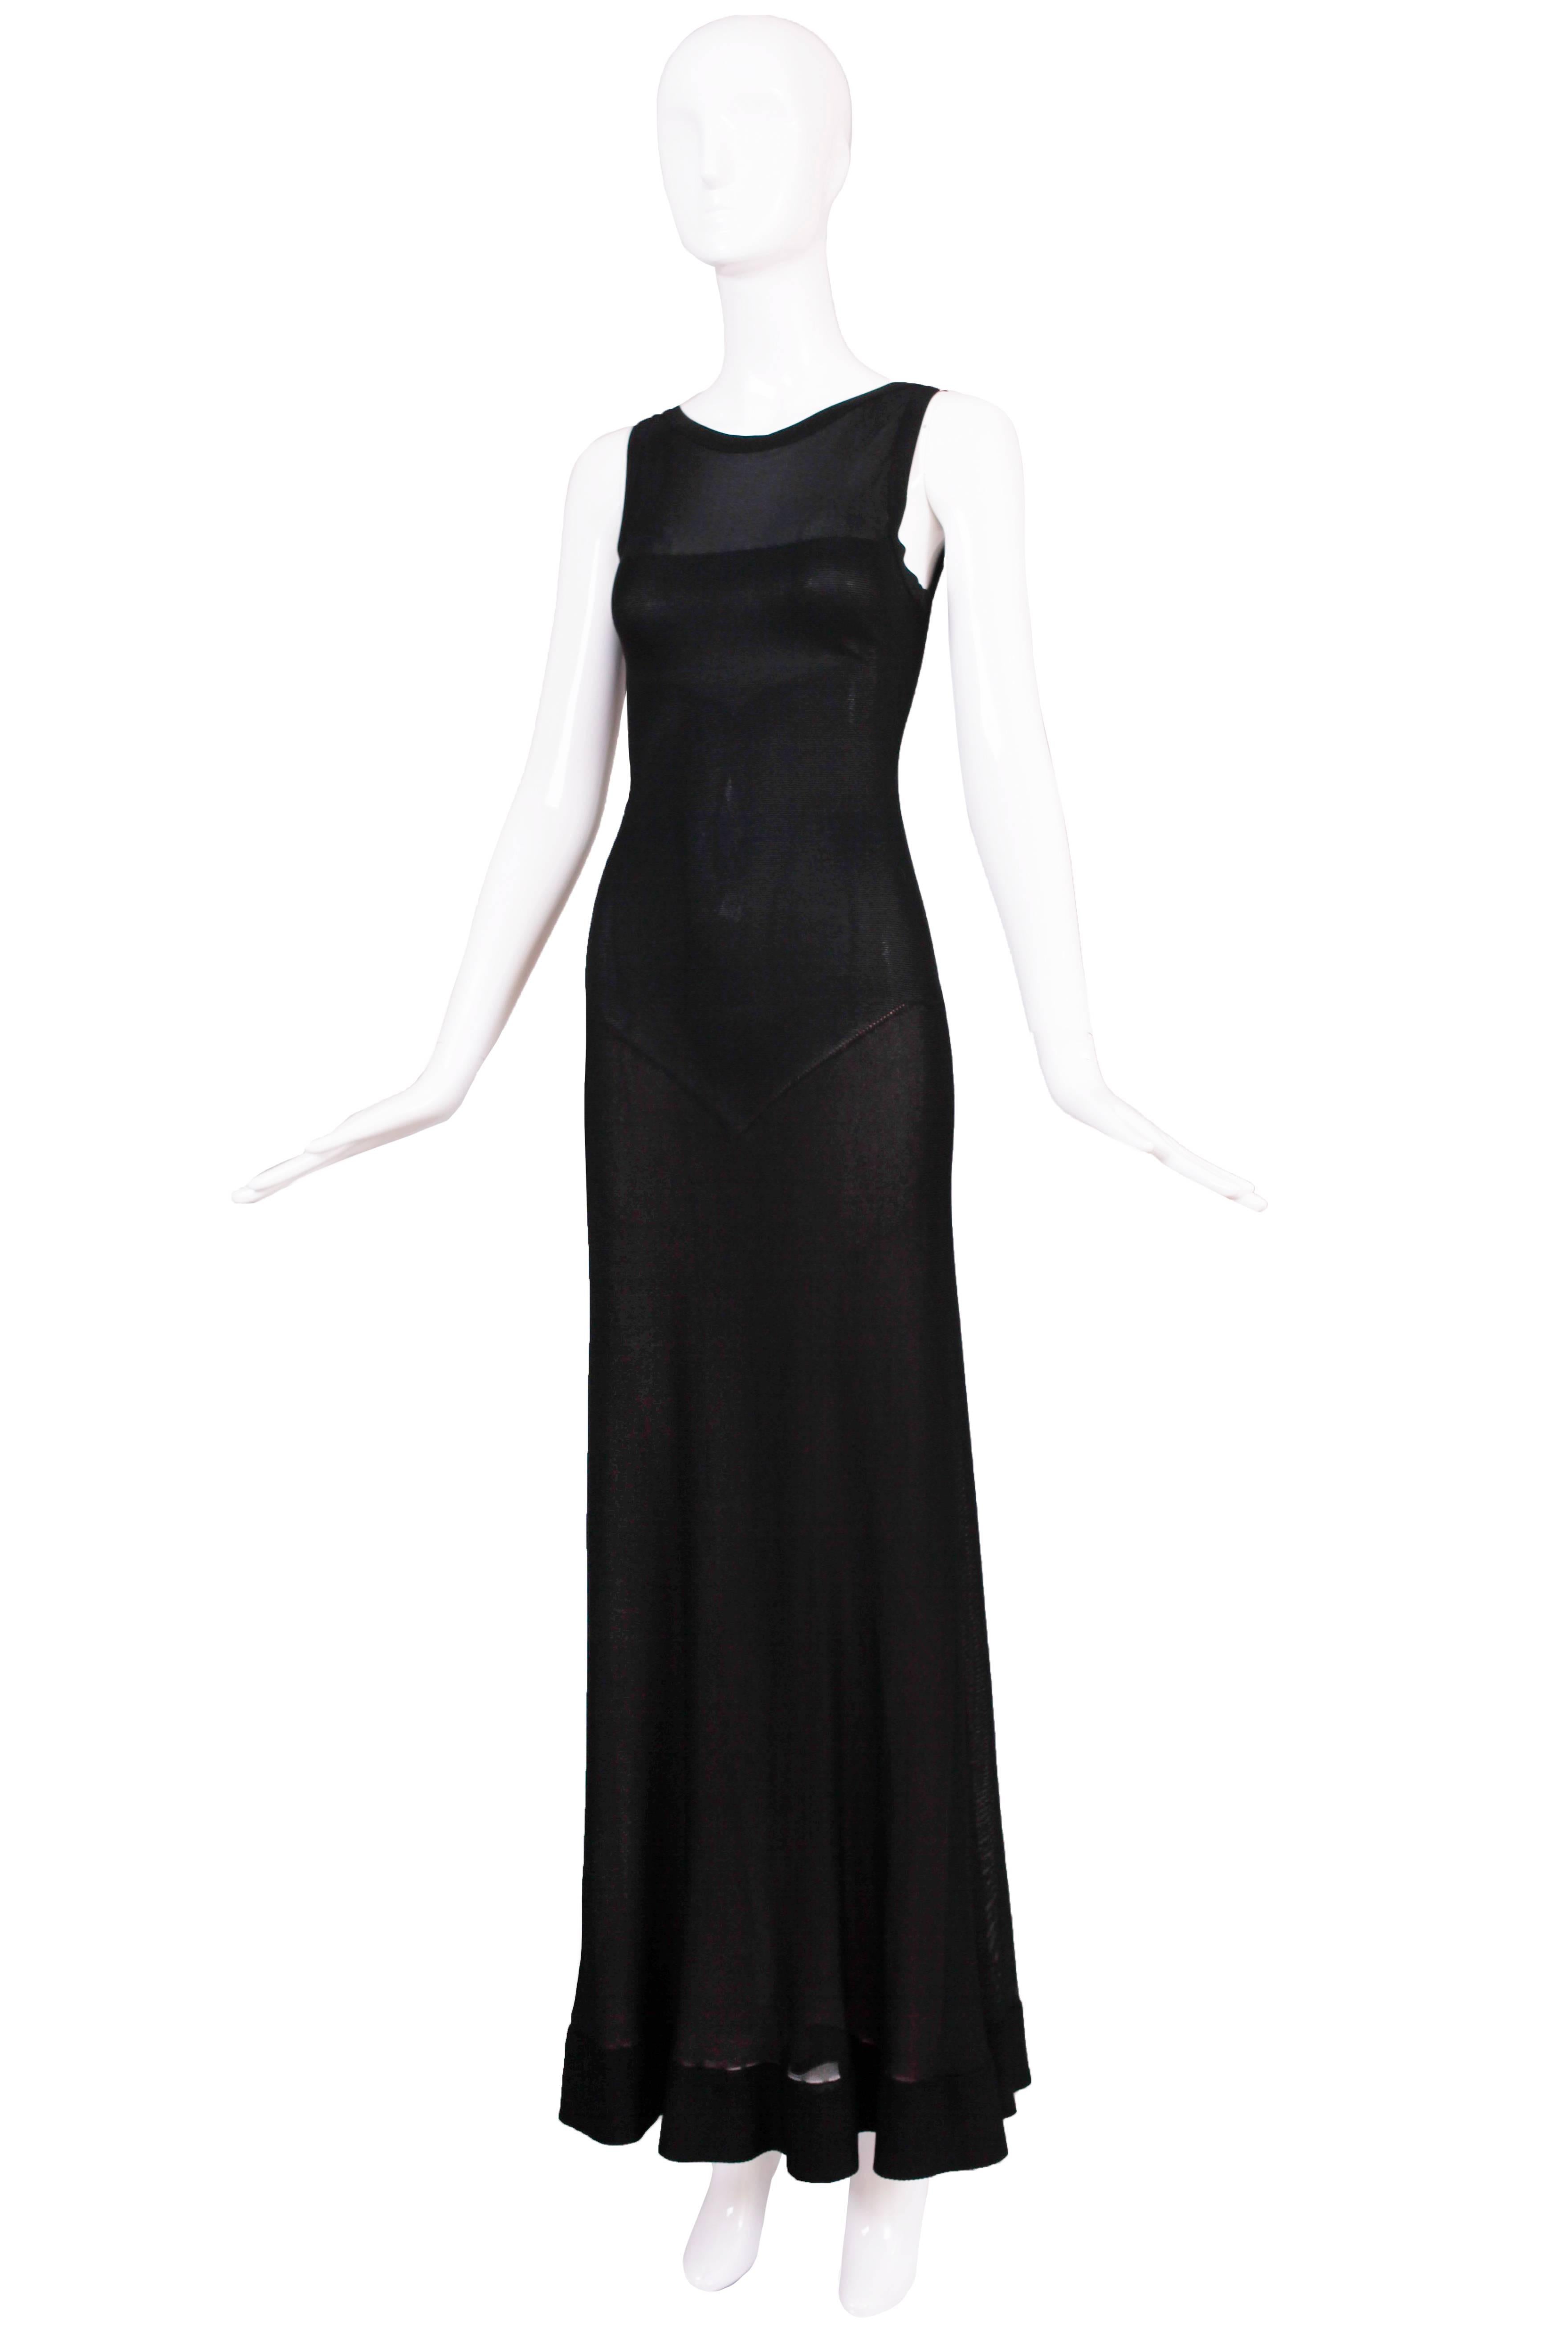 Circa 2005 Azzedine Alaia black fitted evening gown with zipper closure up the back. At the back skirt there are slight gathers as well as a nude-colored layer underneath the skirt. In excellent condition. Size tag 38.